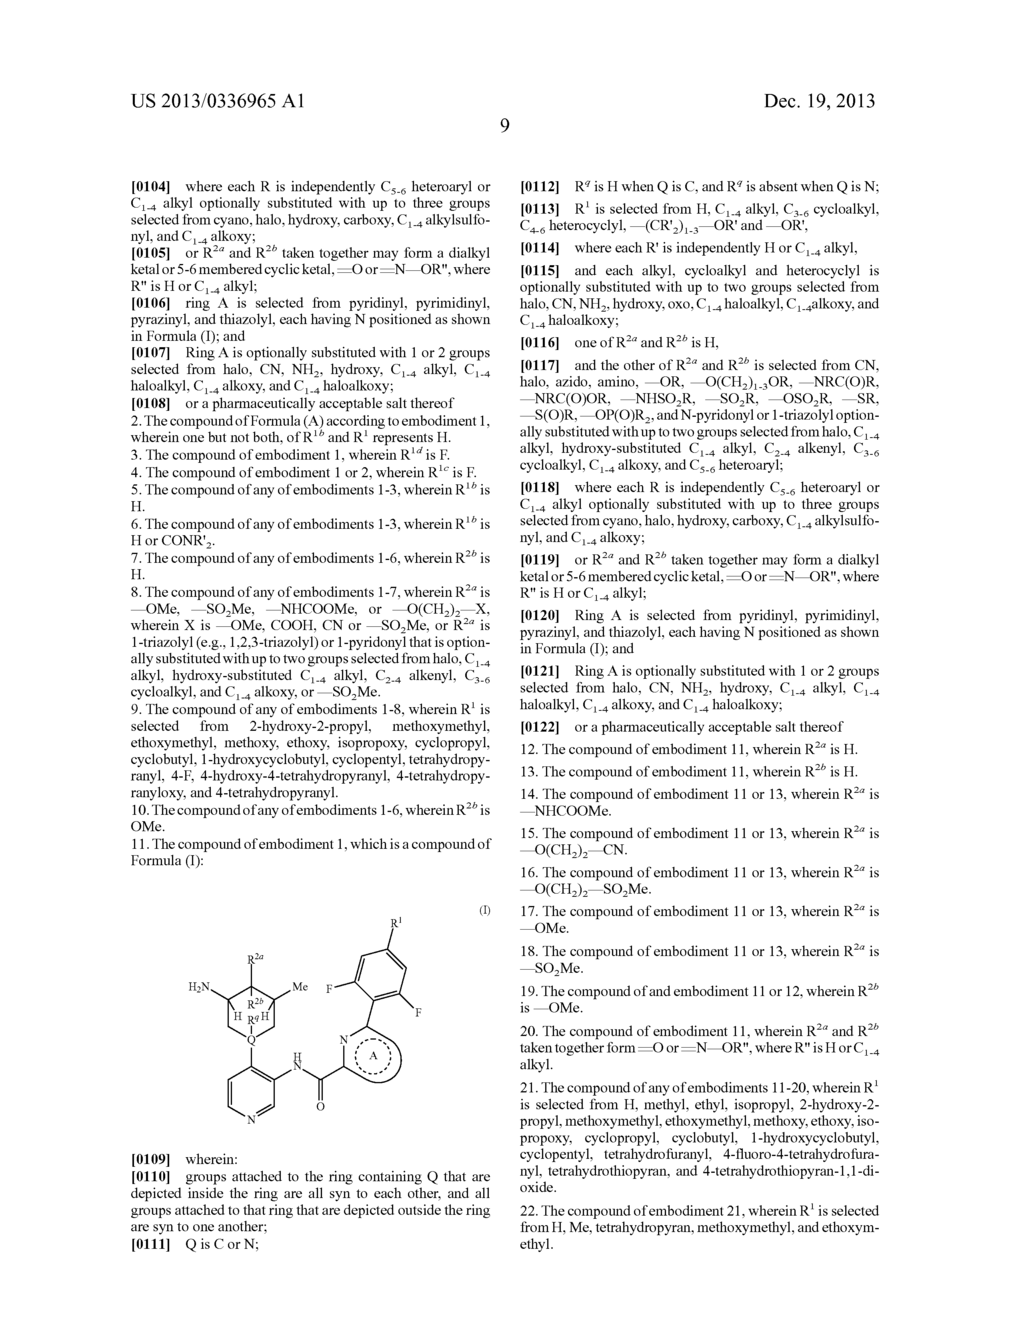 NOVEL RING-SUBSTITUTED N-PYRIDINYL AMIDES AS KINASE INHIBITORS - diagram, schematic, and image 10